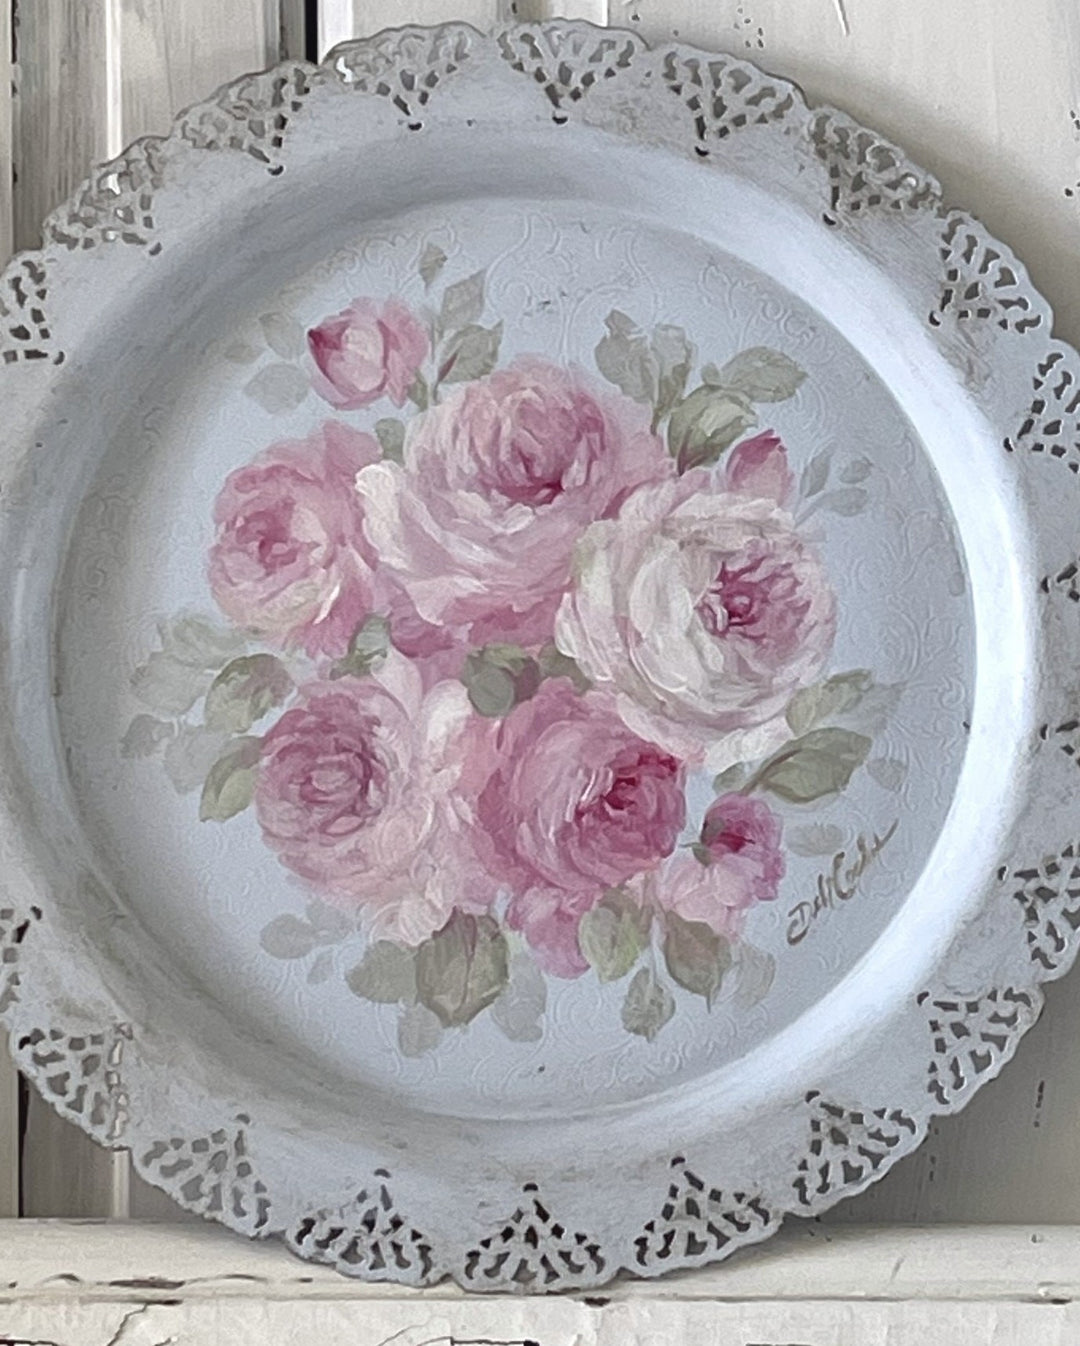 Shabby Chic Vintage Pink Roses Lace Edge Tray Original by Debi Coules